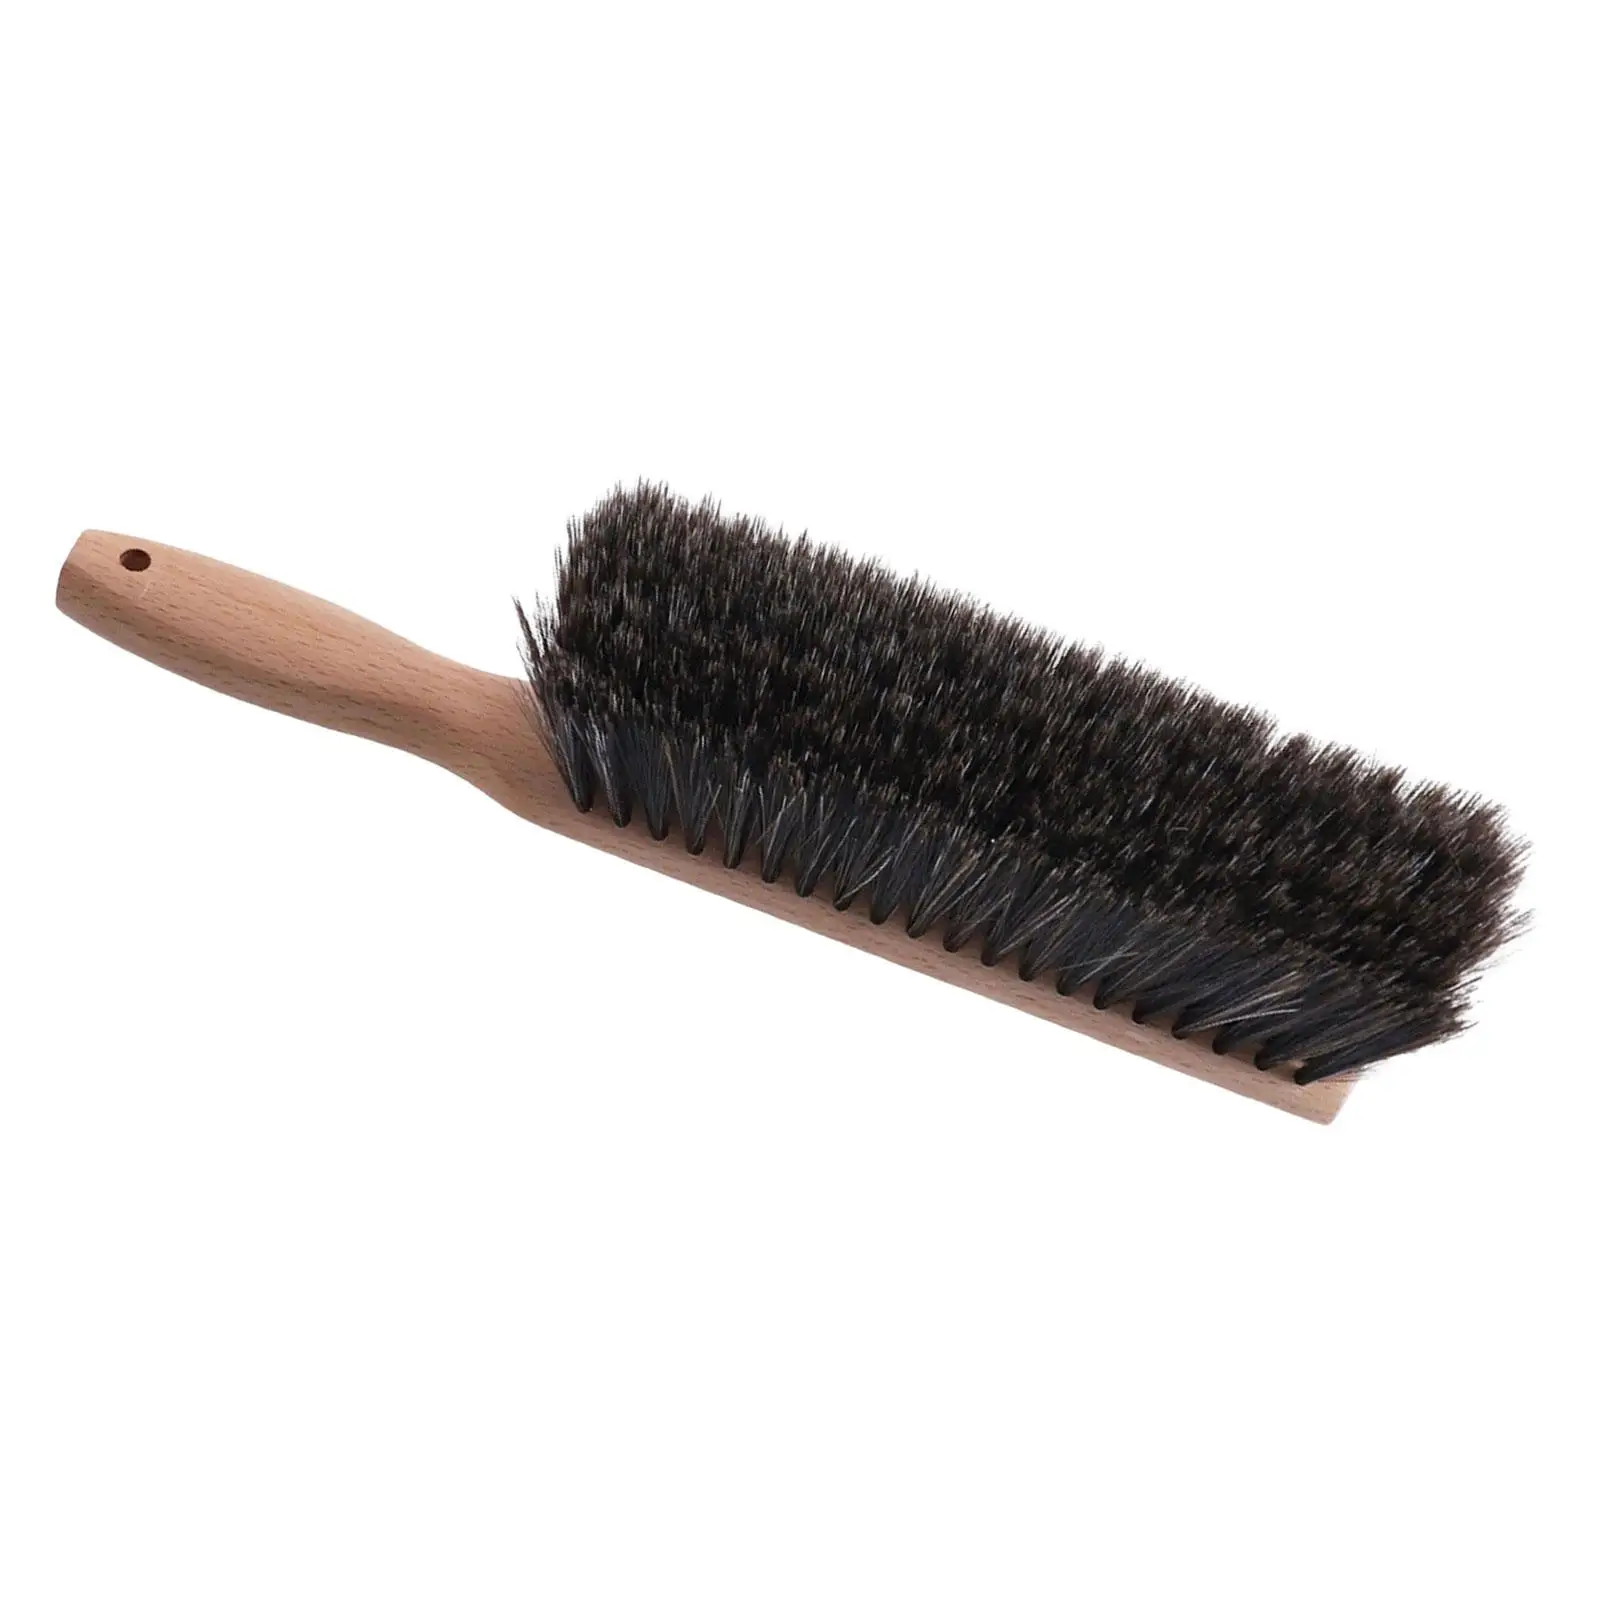 Dustproof Brush Clothes Brush Whisk Broom Long Handle Cleaning Brushes for Cleaning Supplies Furniture Draft Fireplace Keyboard